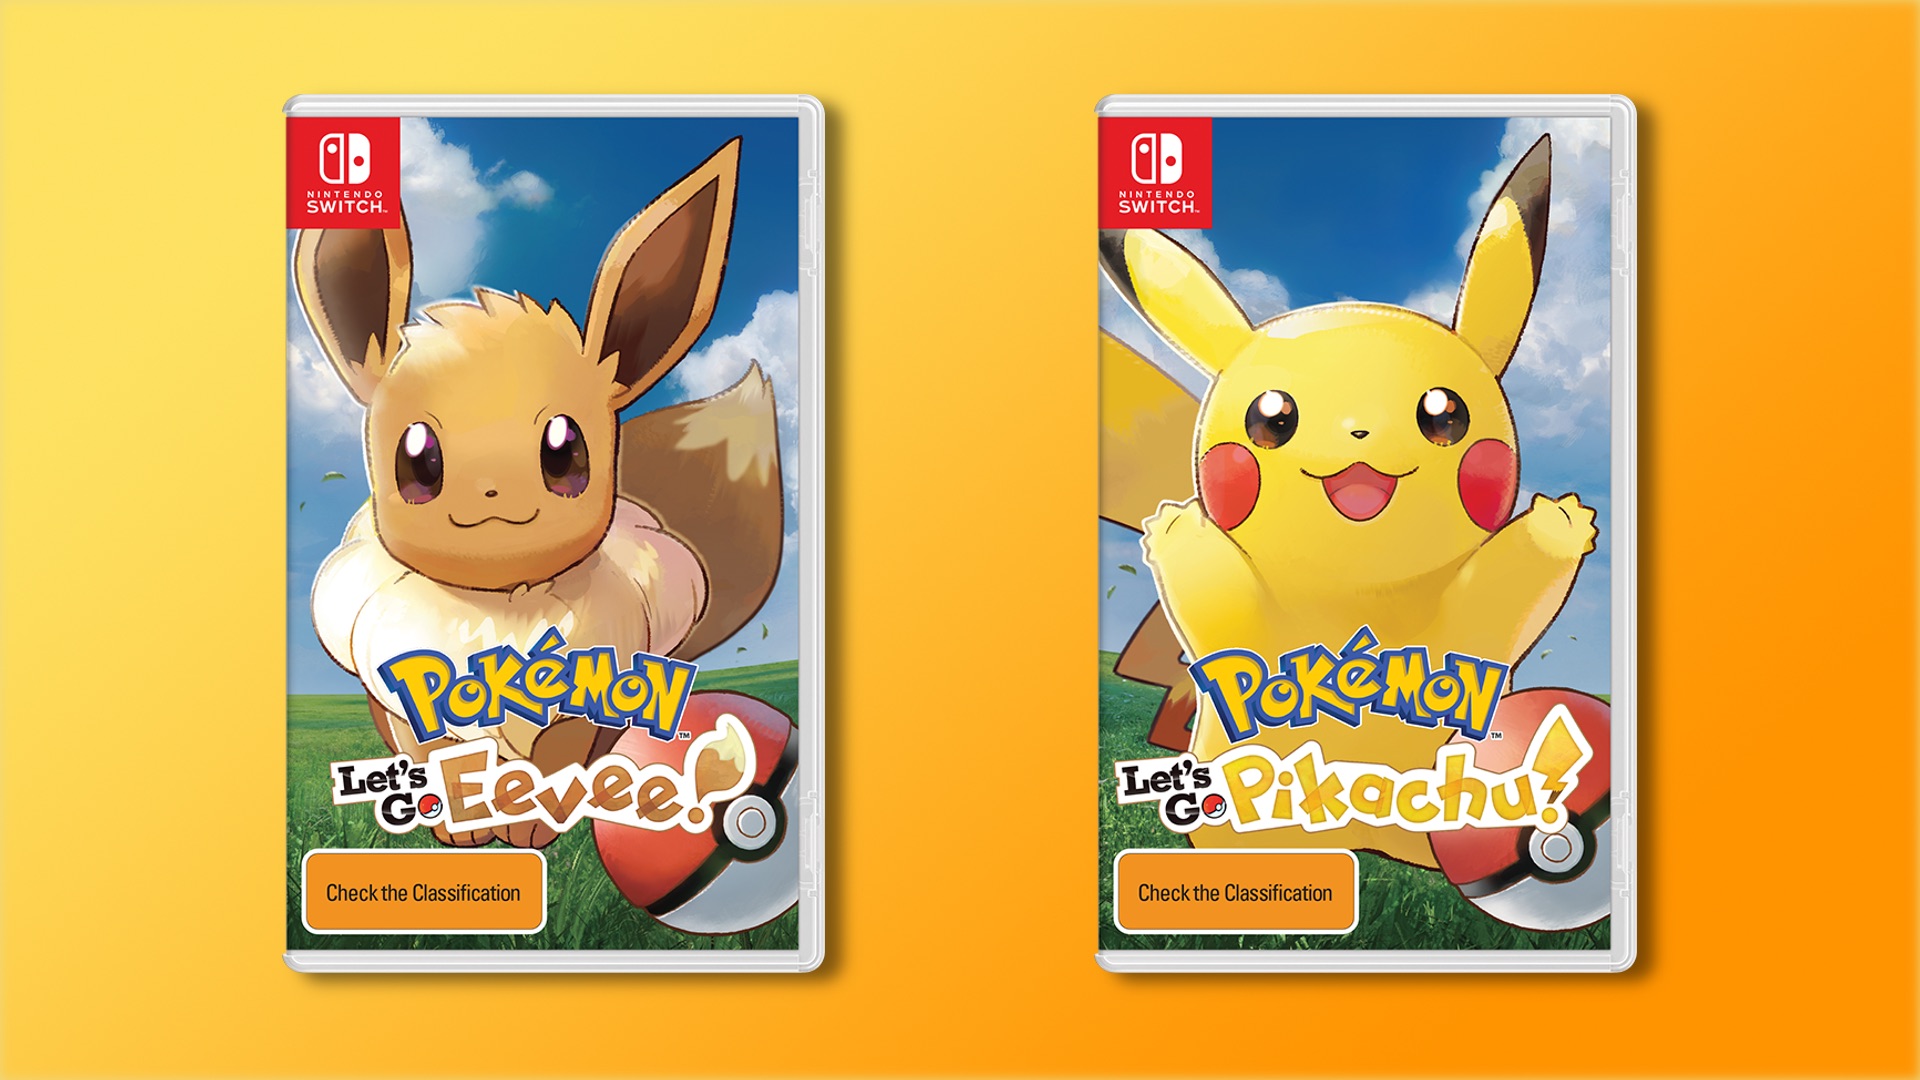 will other pokemon games come to switch